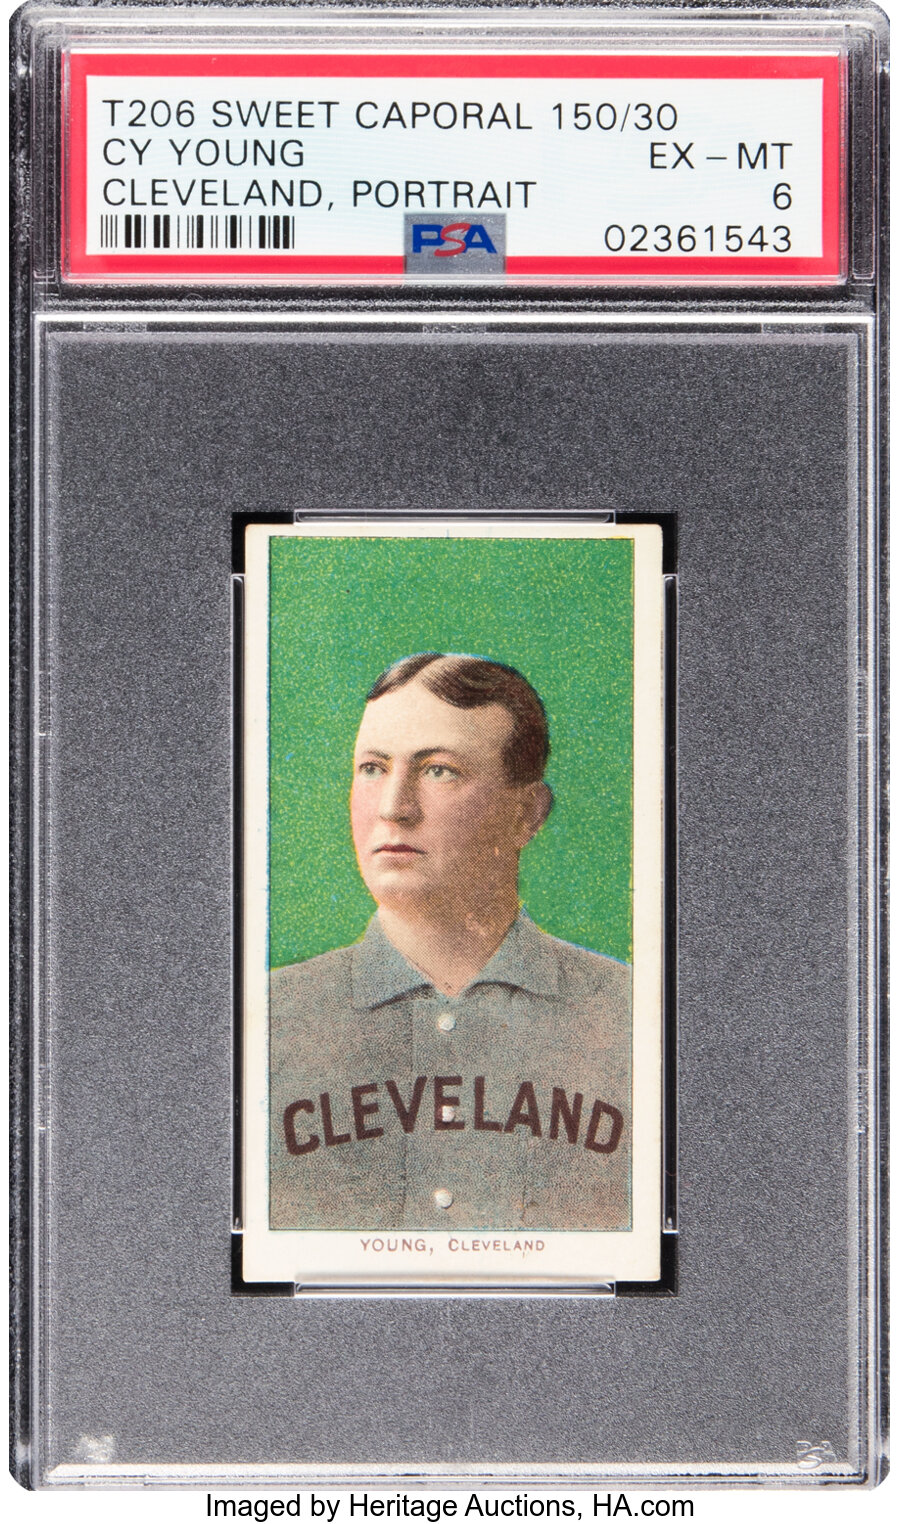 1909-11 T206 Sweet Caporal 150/30 Cy Young (Cleveland, Portrait) PSA EX-MT 6 -- Pop One, Two Higher!